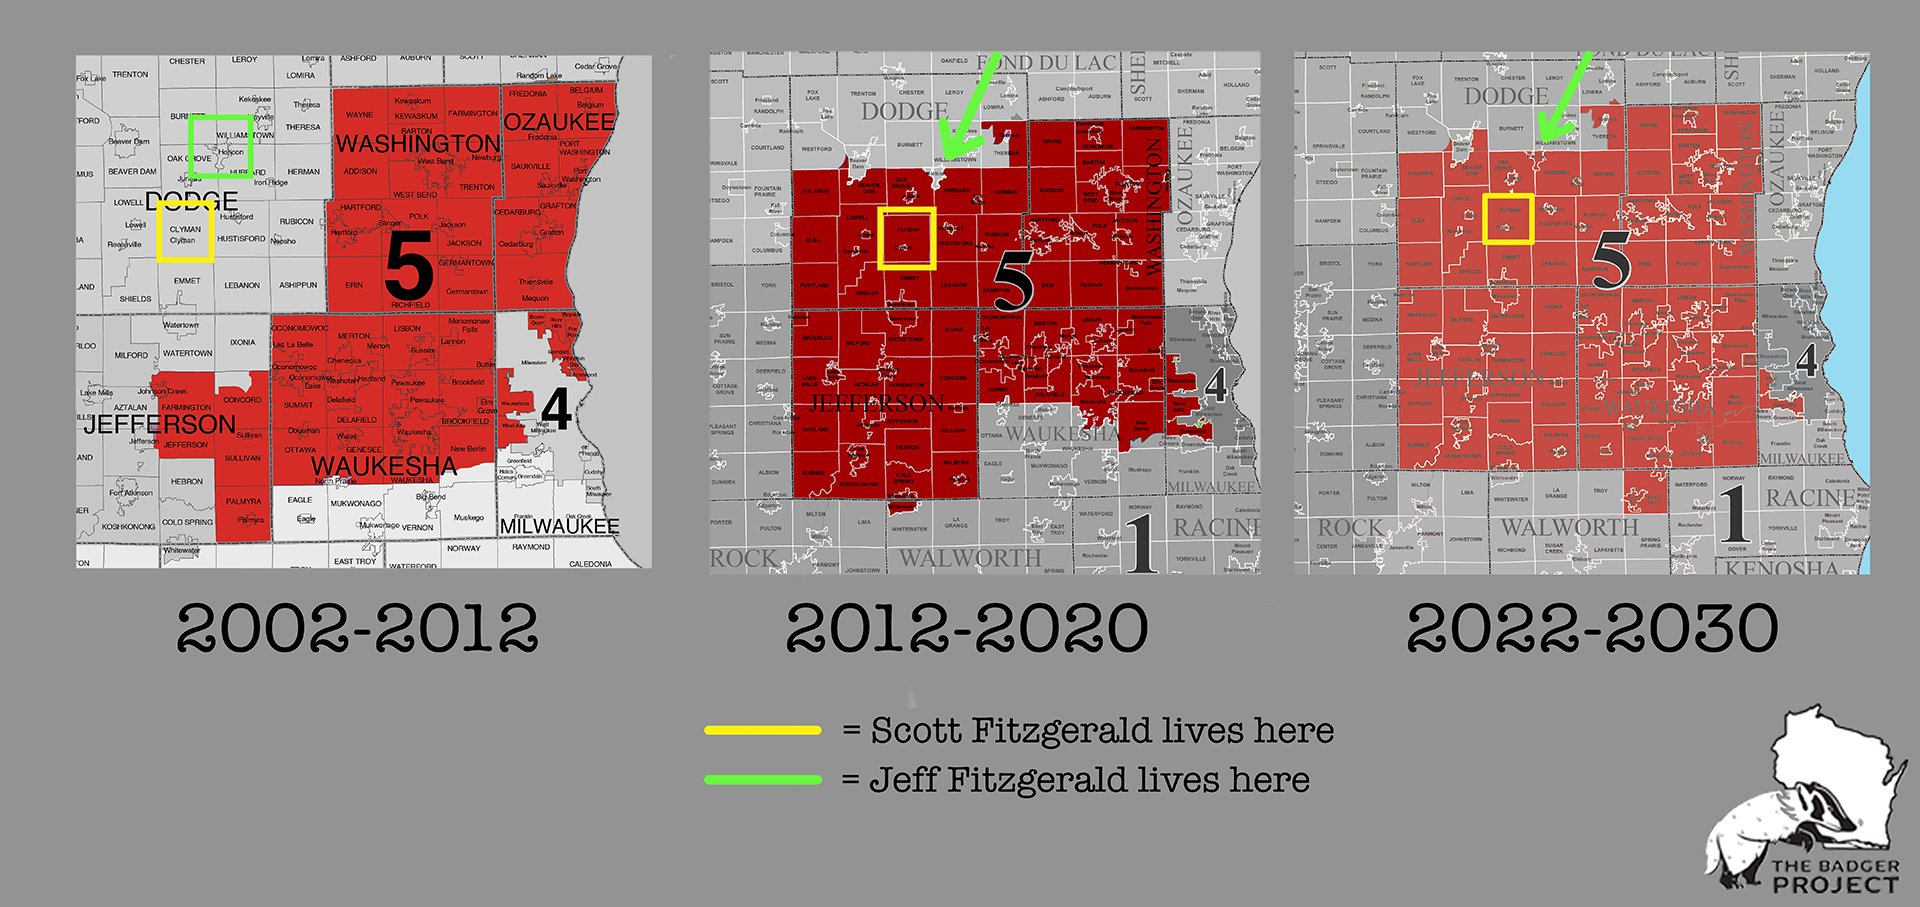 Three side-by-side maps show the boundaries of Wisconsin's 5th Congressional District from 2002 to 2012, from 2012 to 2022, and those established for 2022 to 2030, with markers indicating the municipalities where the Scott and Jeff Fitzgerald each reside.